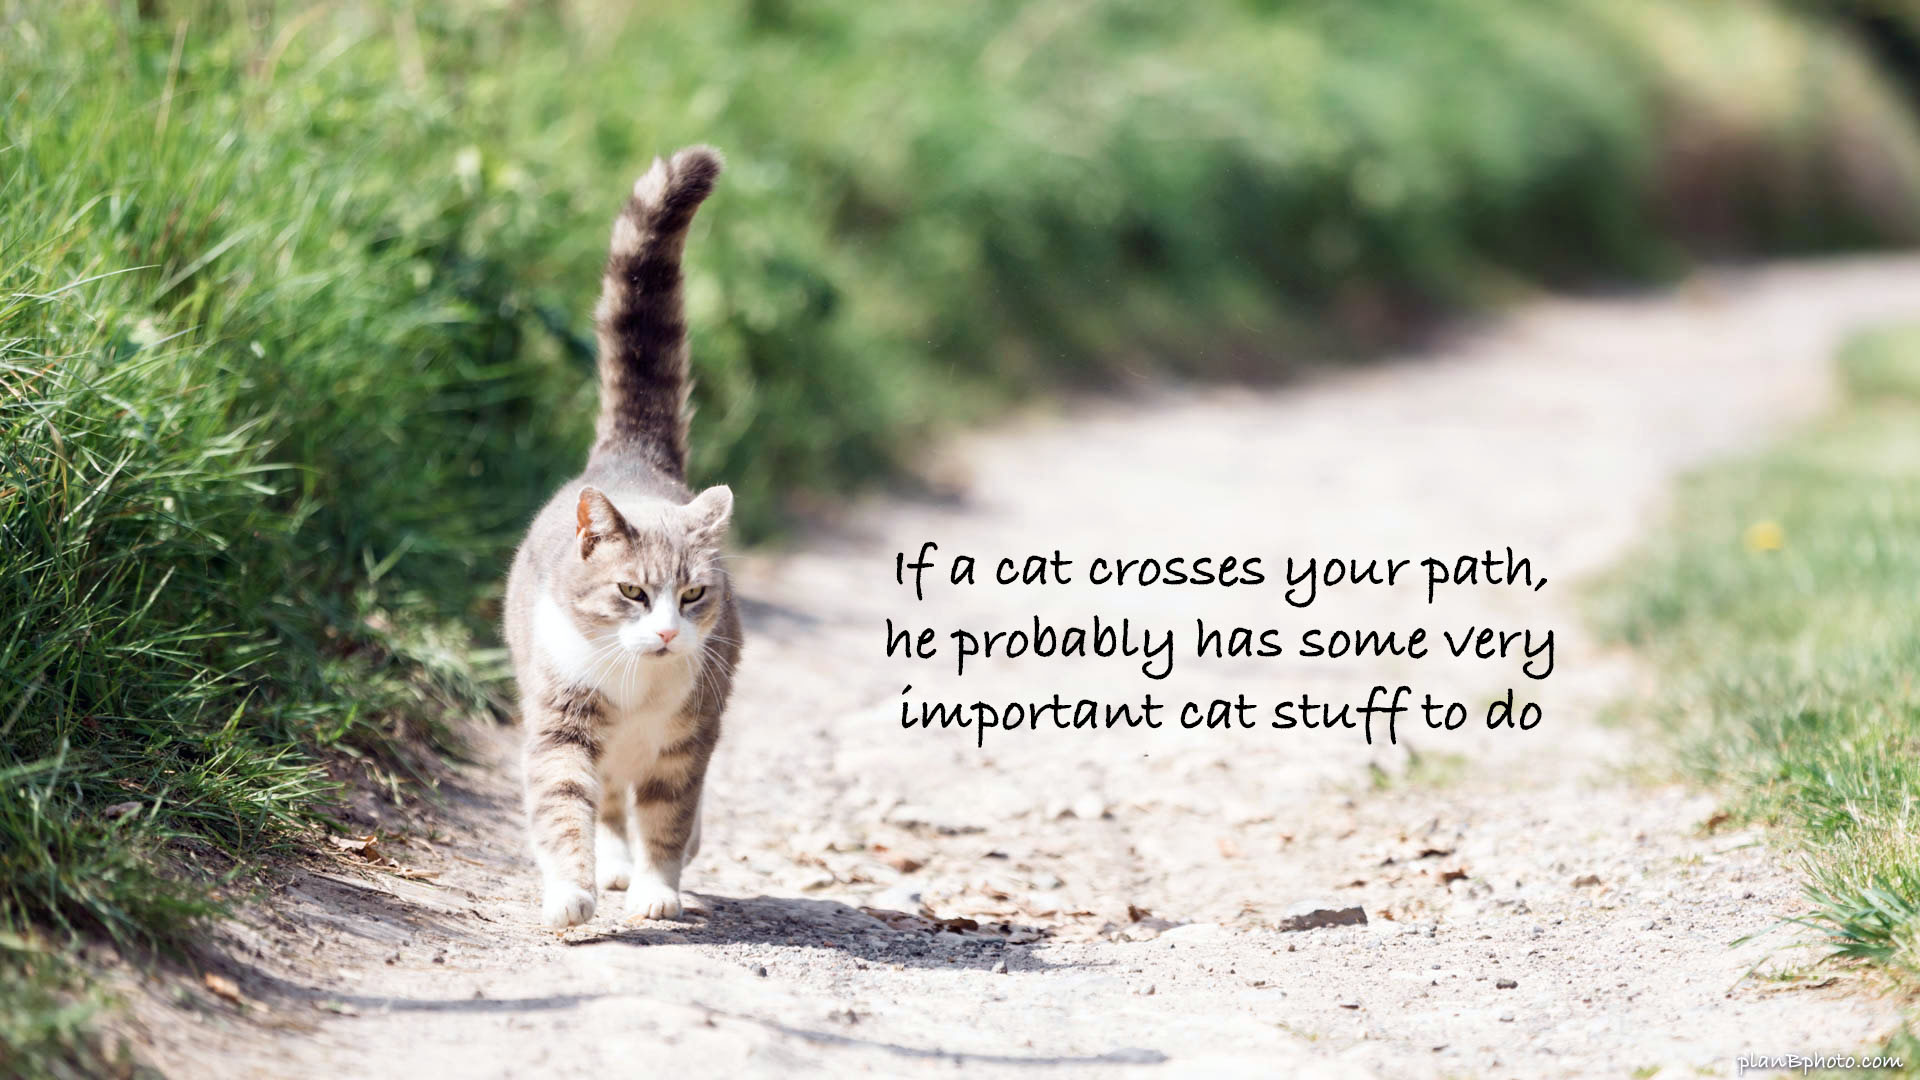 Cute meme with a cat walking on a path